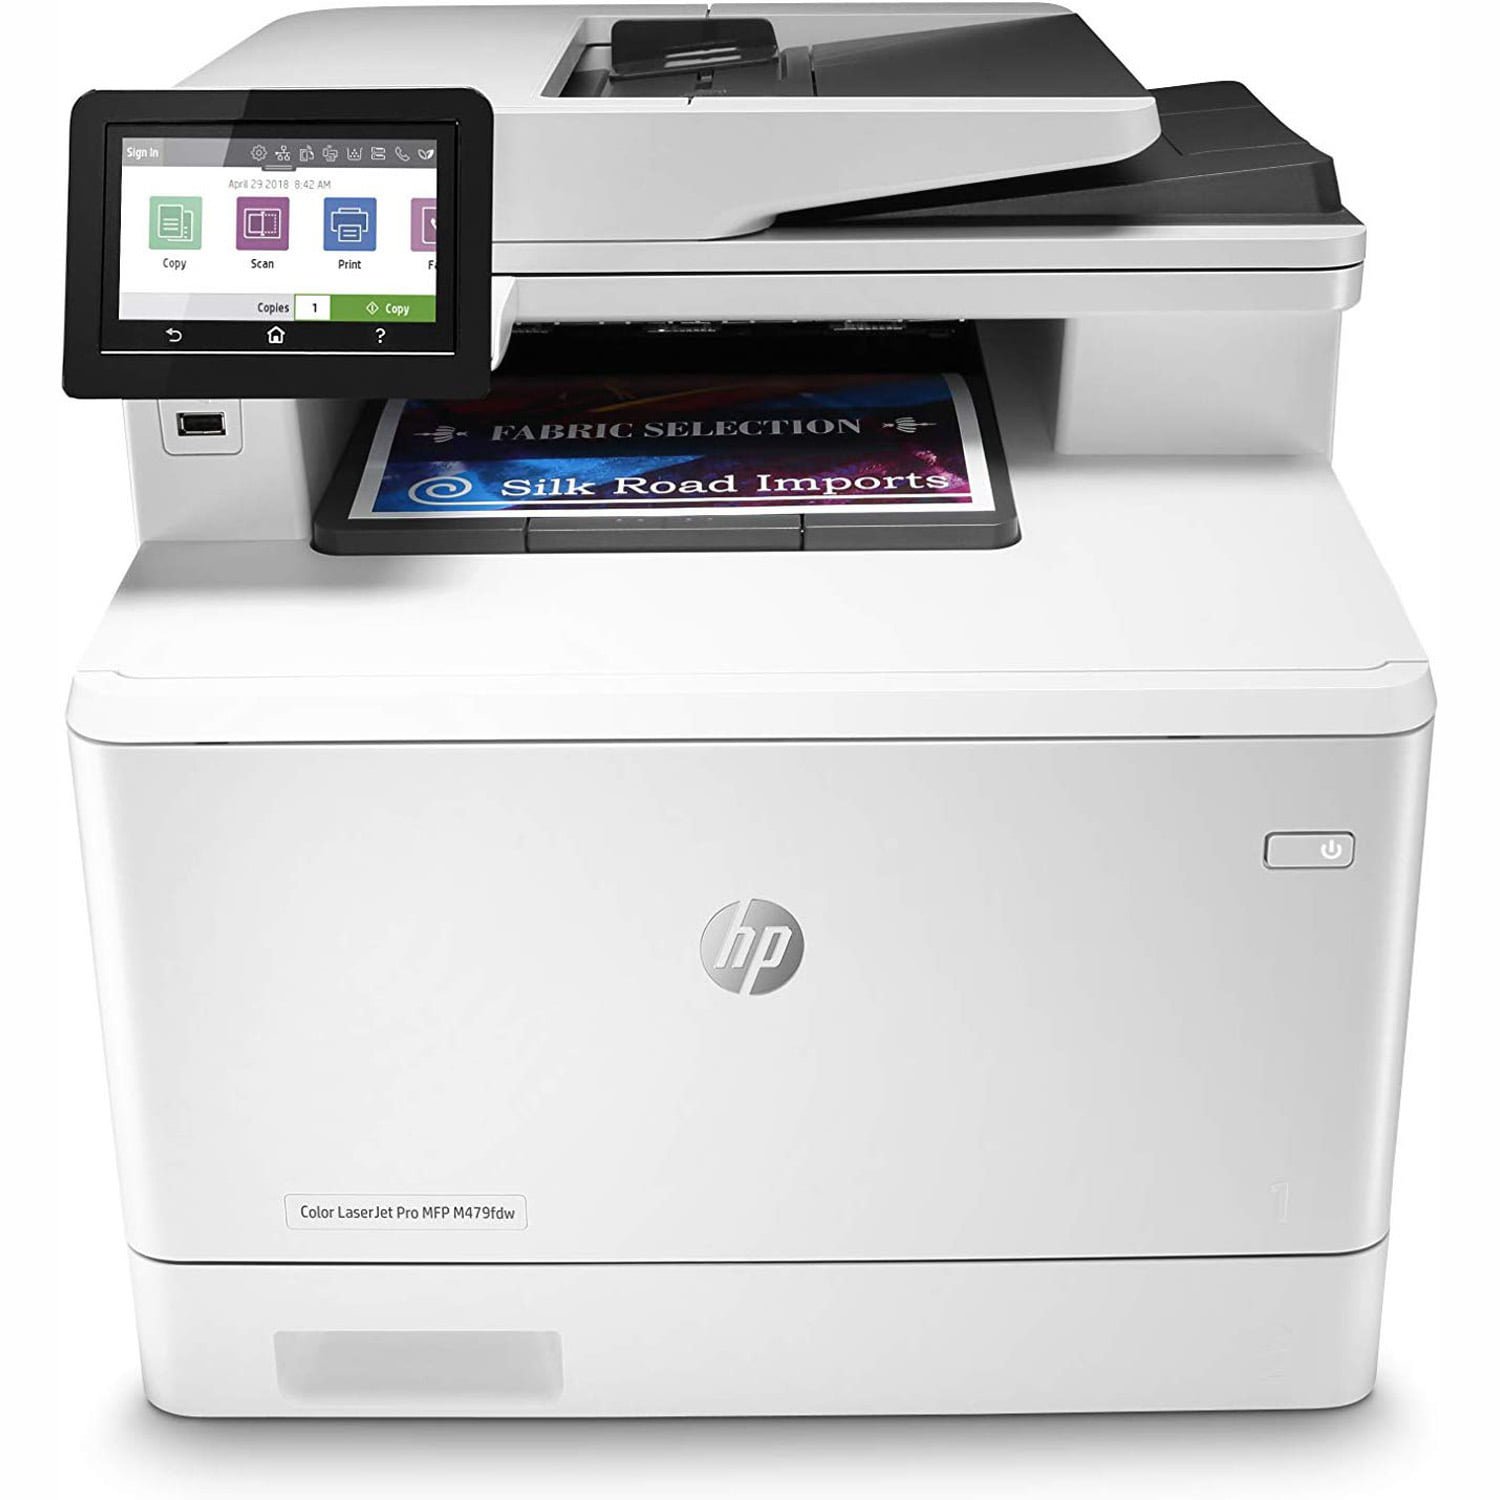 HP Color LaserJet Pro MFP M479fdw All-in-One printer